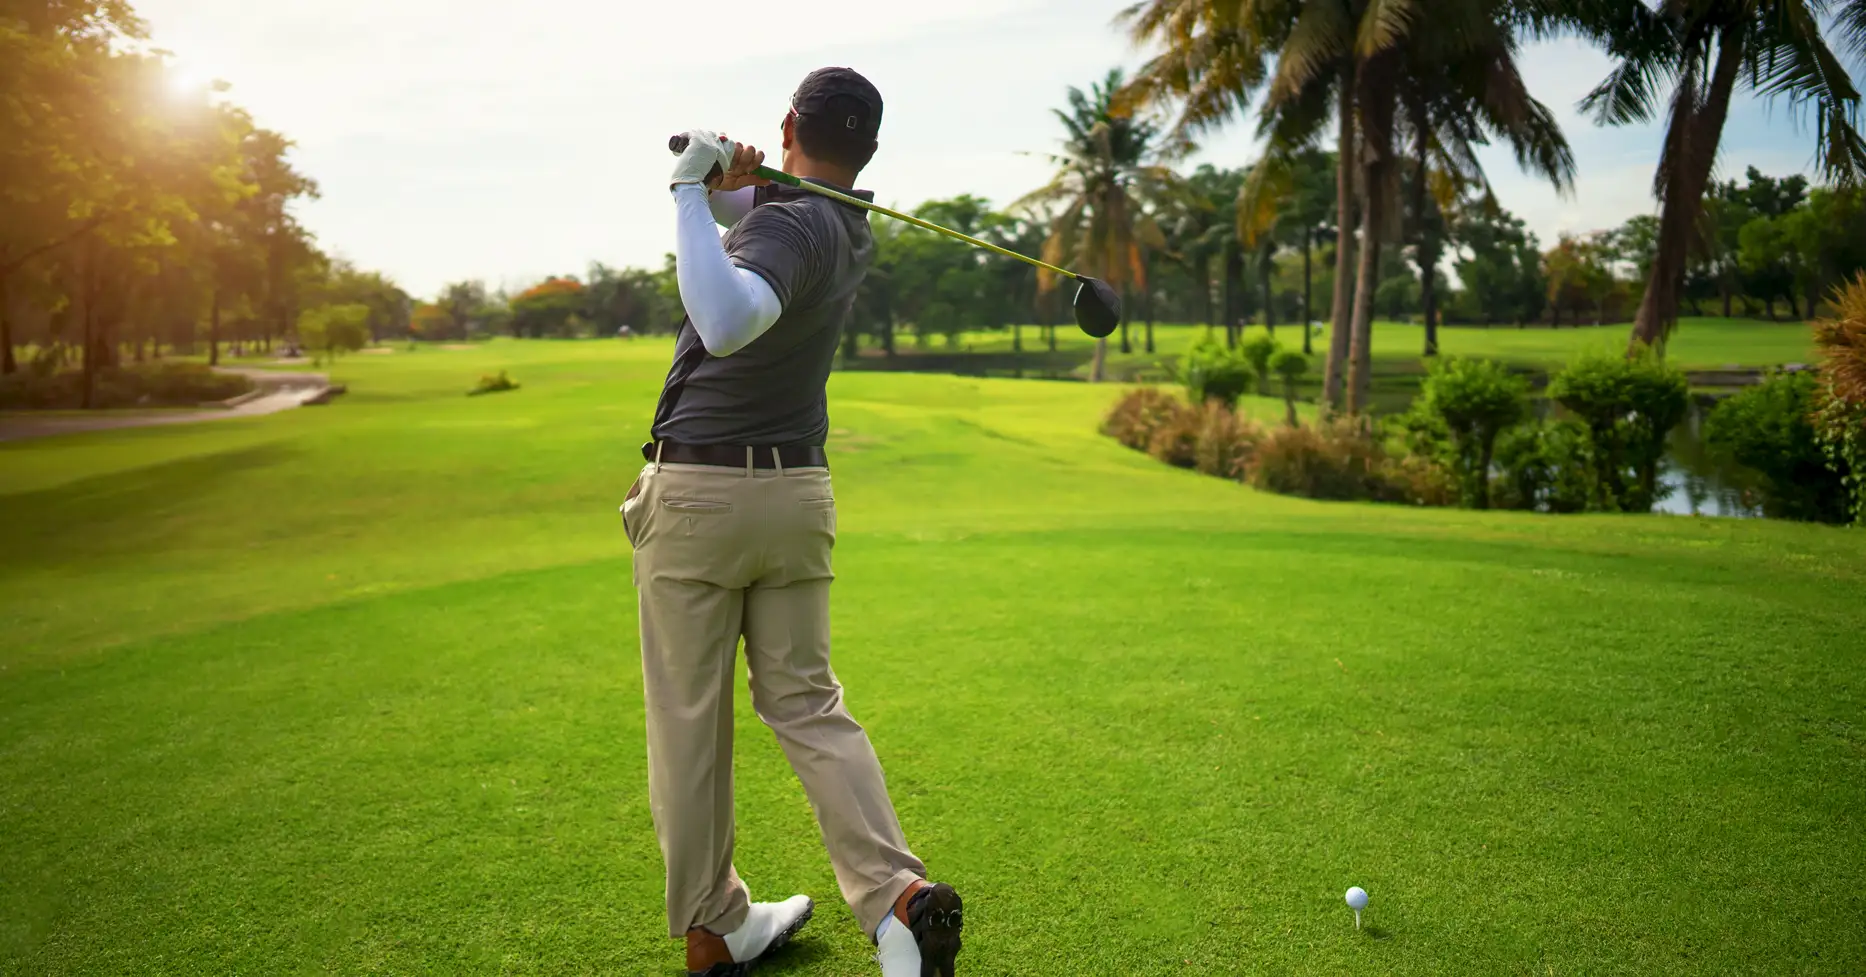 Man taking swing on golf course surrounded by palm trees